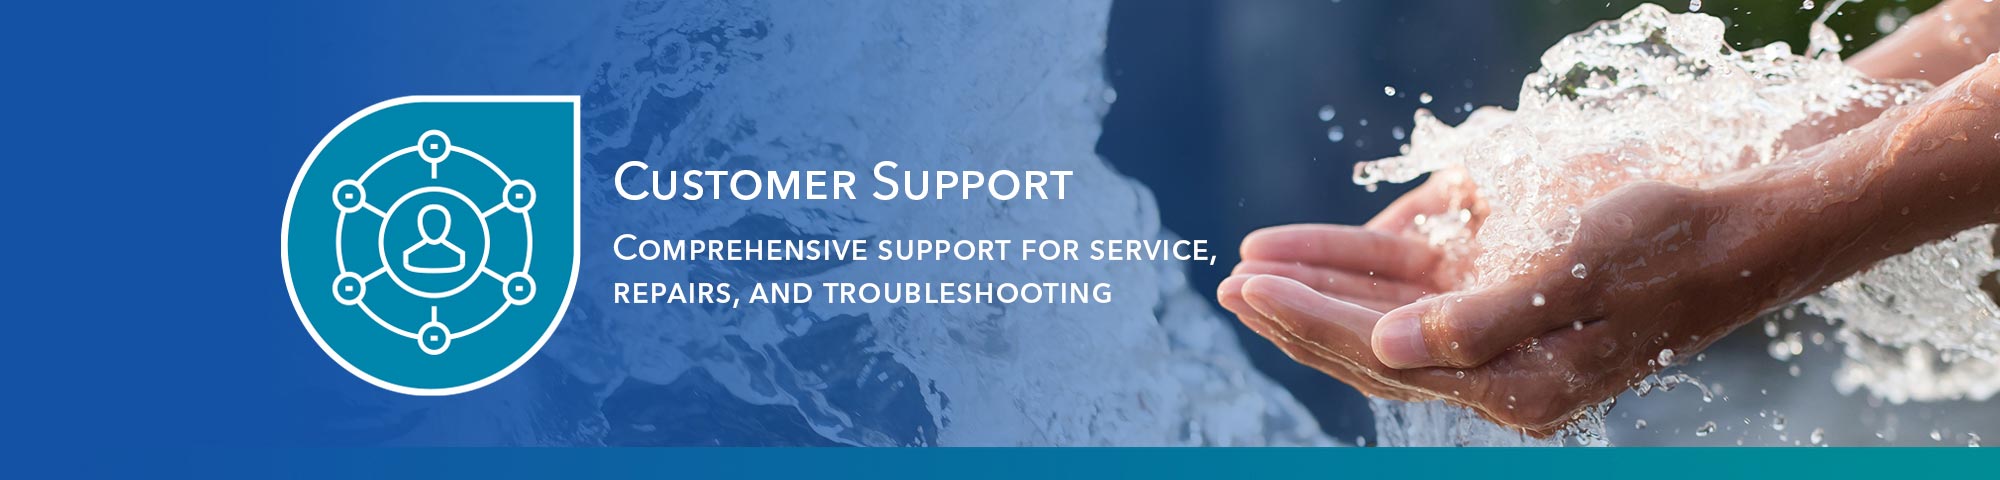 ysi customer support and service